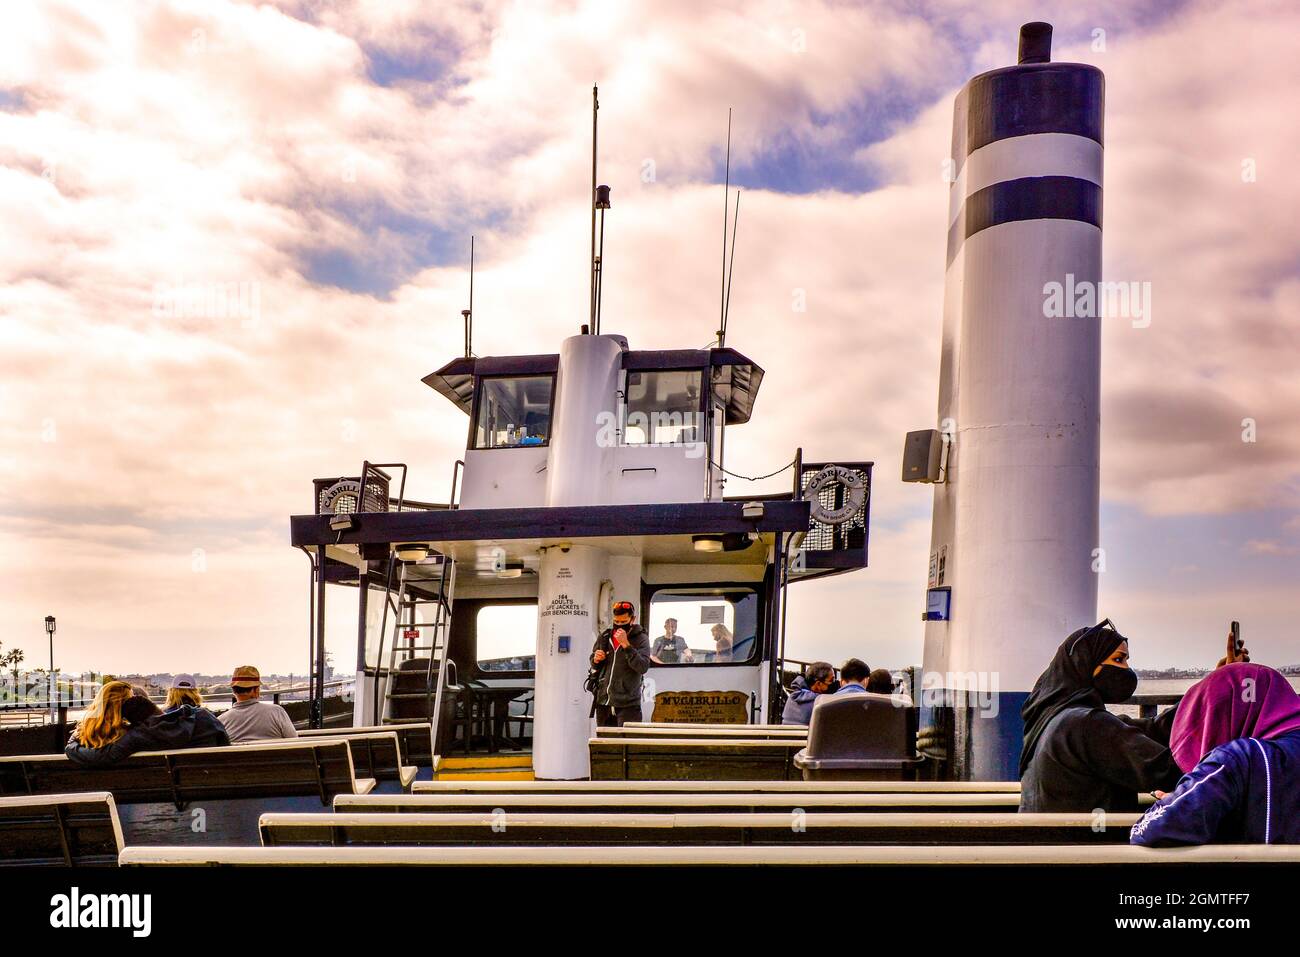 Oversized funnel for exhaust gases dominates the deck with passengers on the Cabrillo Ferry boat crossing the San Diego Bay from Coronado Island, CA Stock Photo